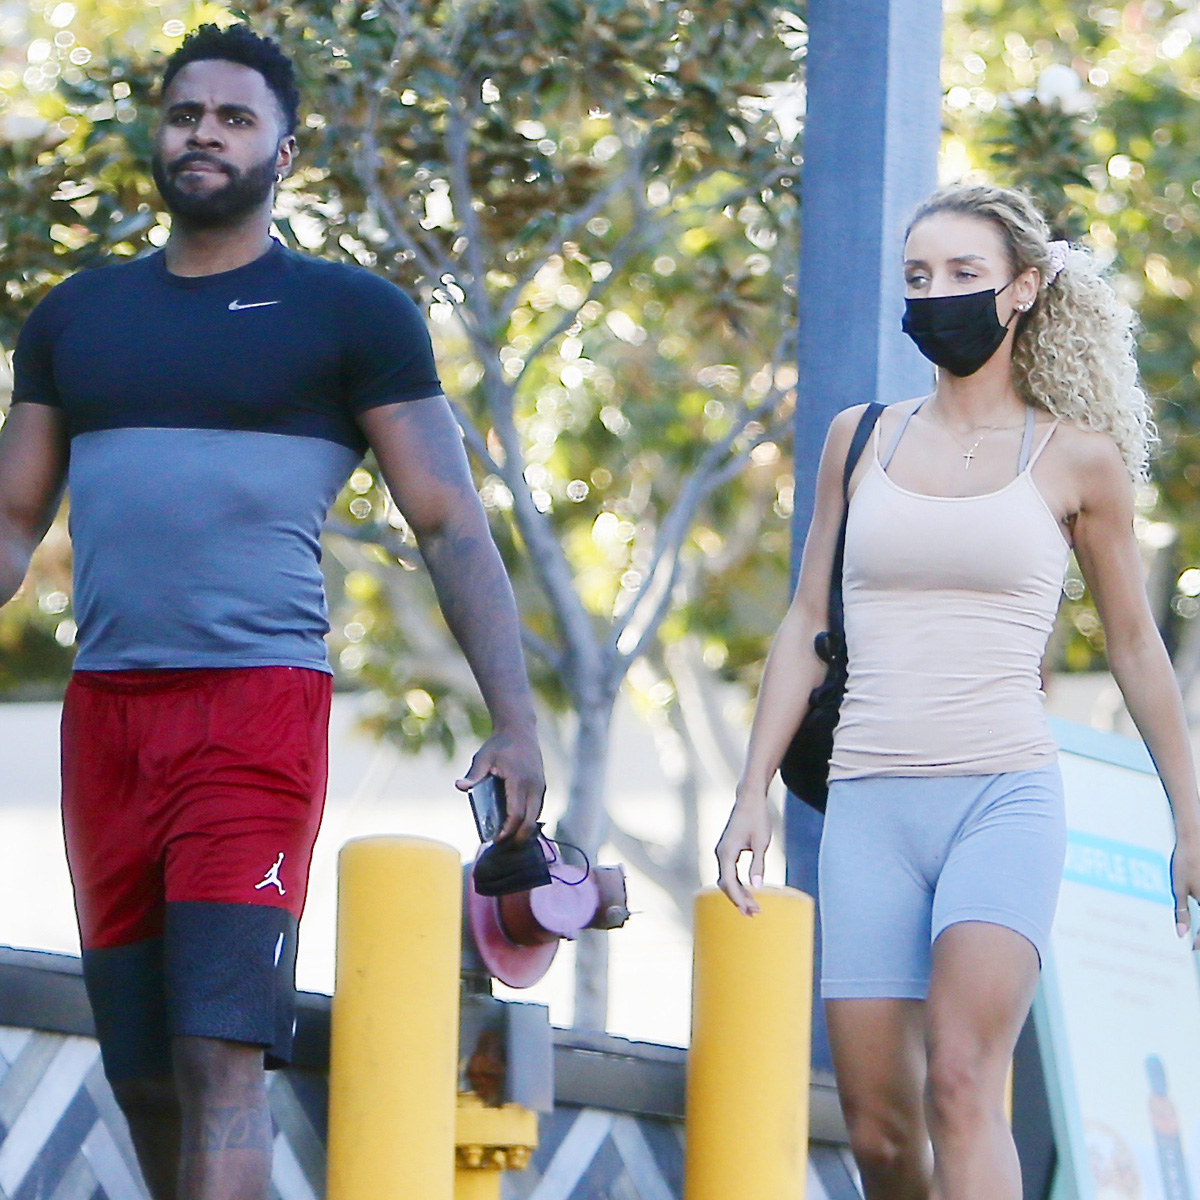 Jason Derulo and Jena Frumes Rumors Outing - E! Online